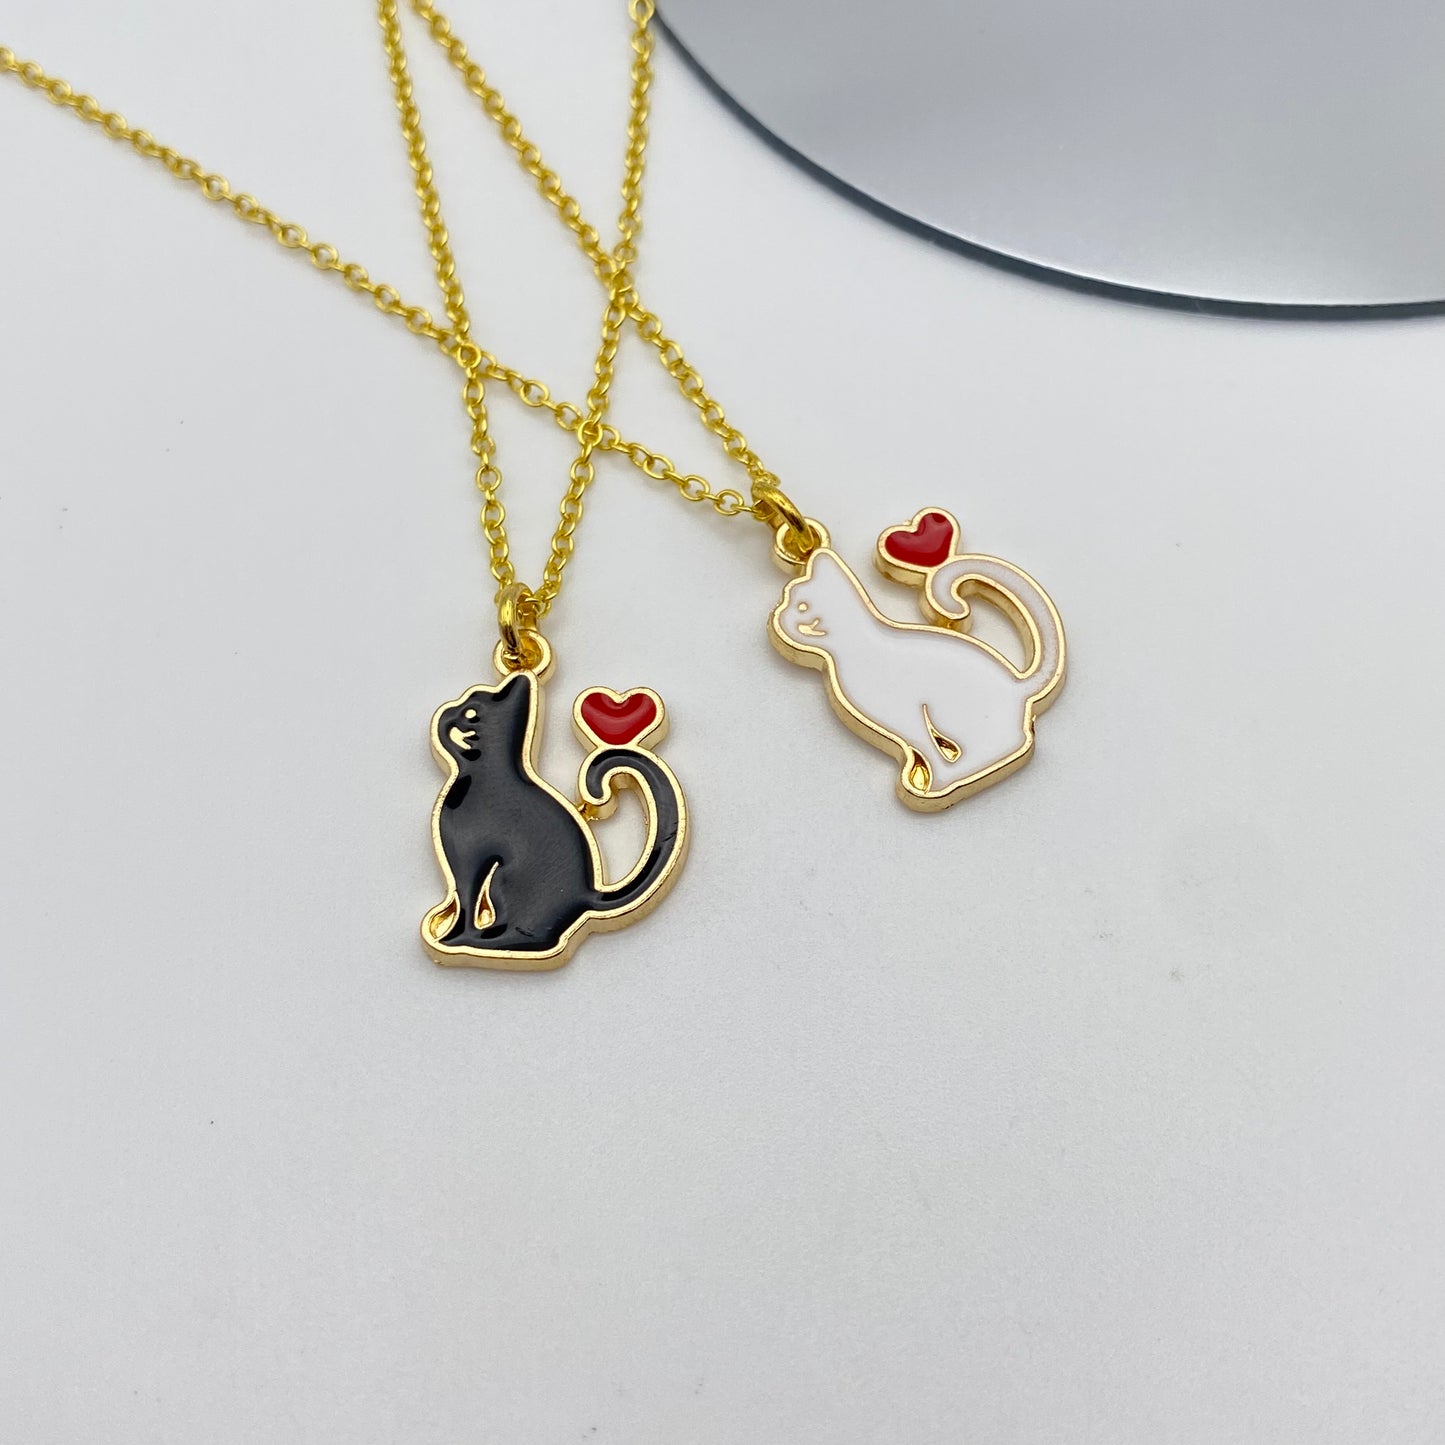 Black and White Cat Heart Matching Necklaces